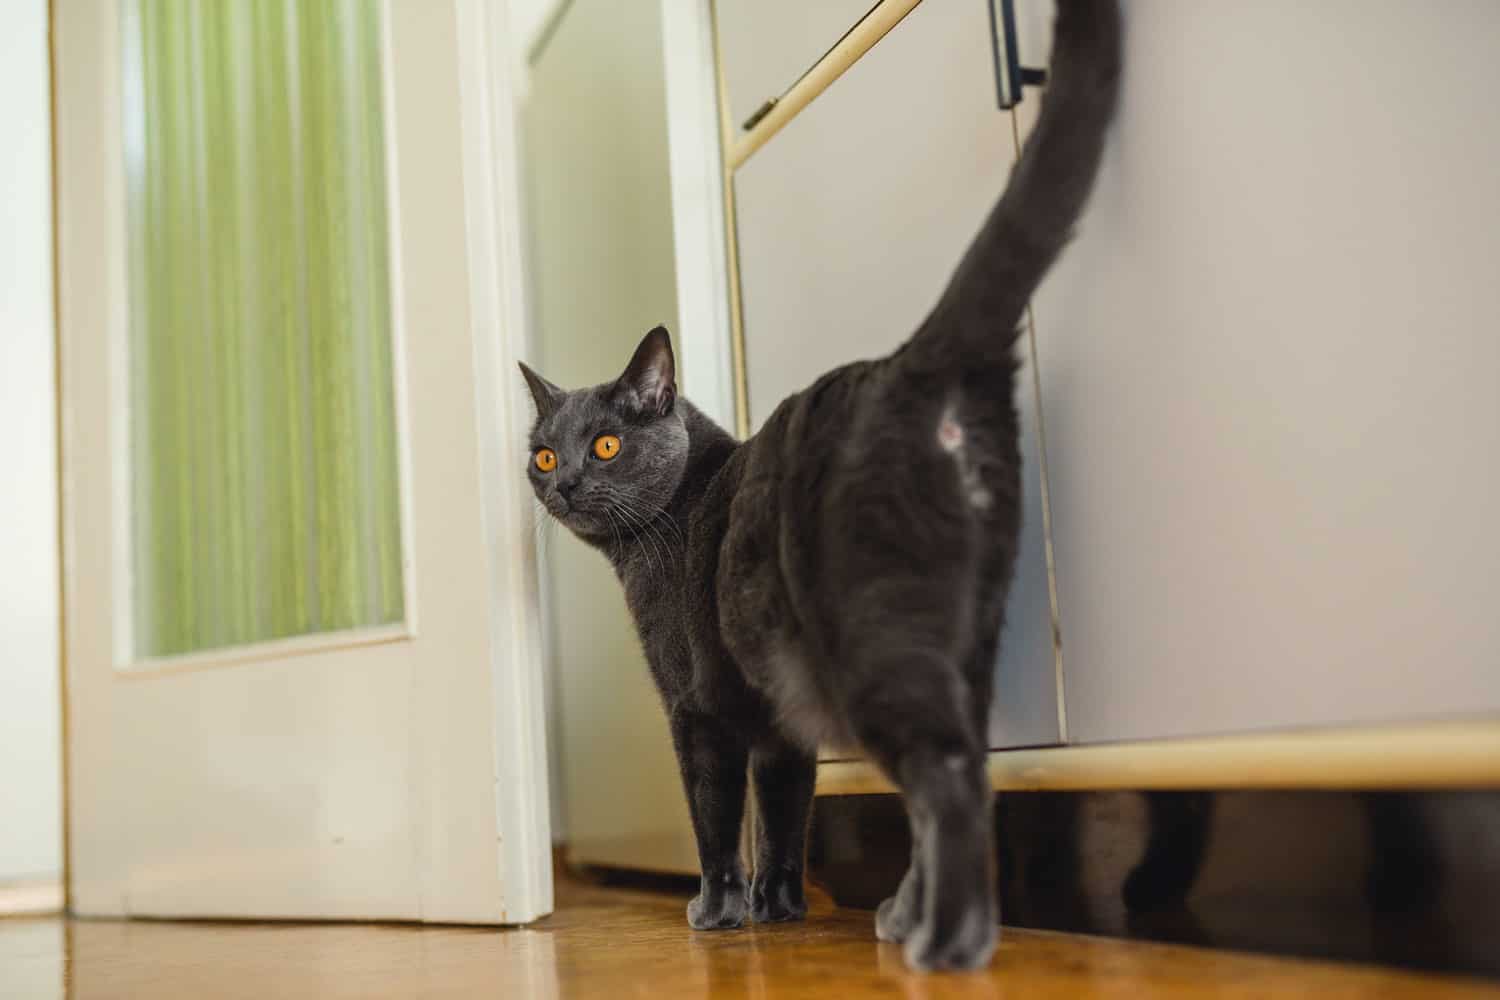 A Chartreux cat looking at something while walking to the door